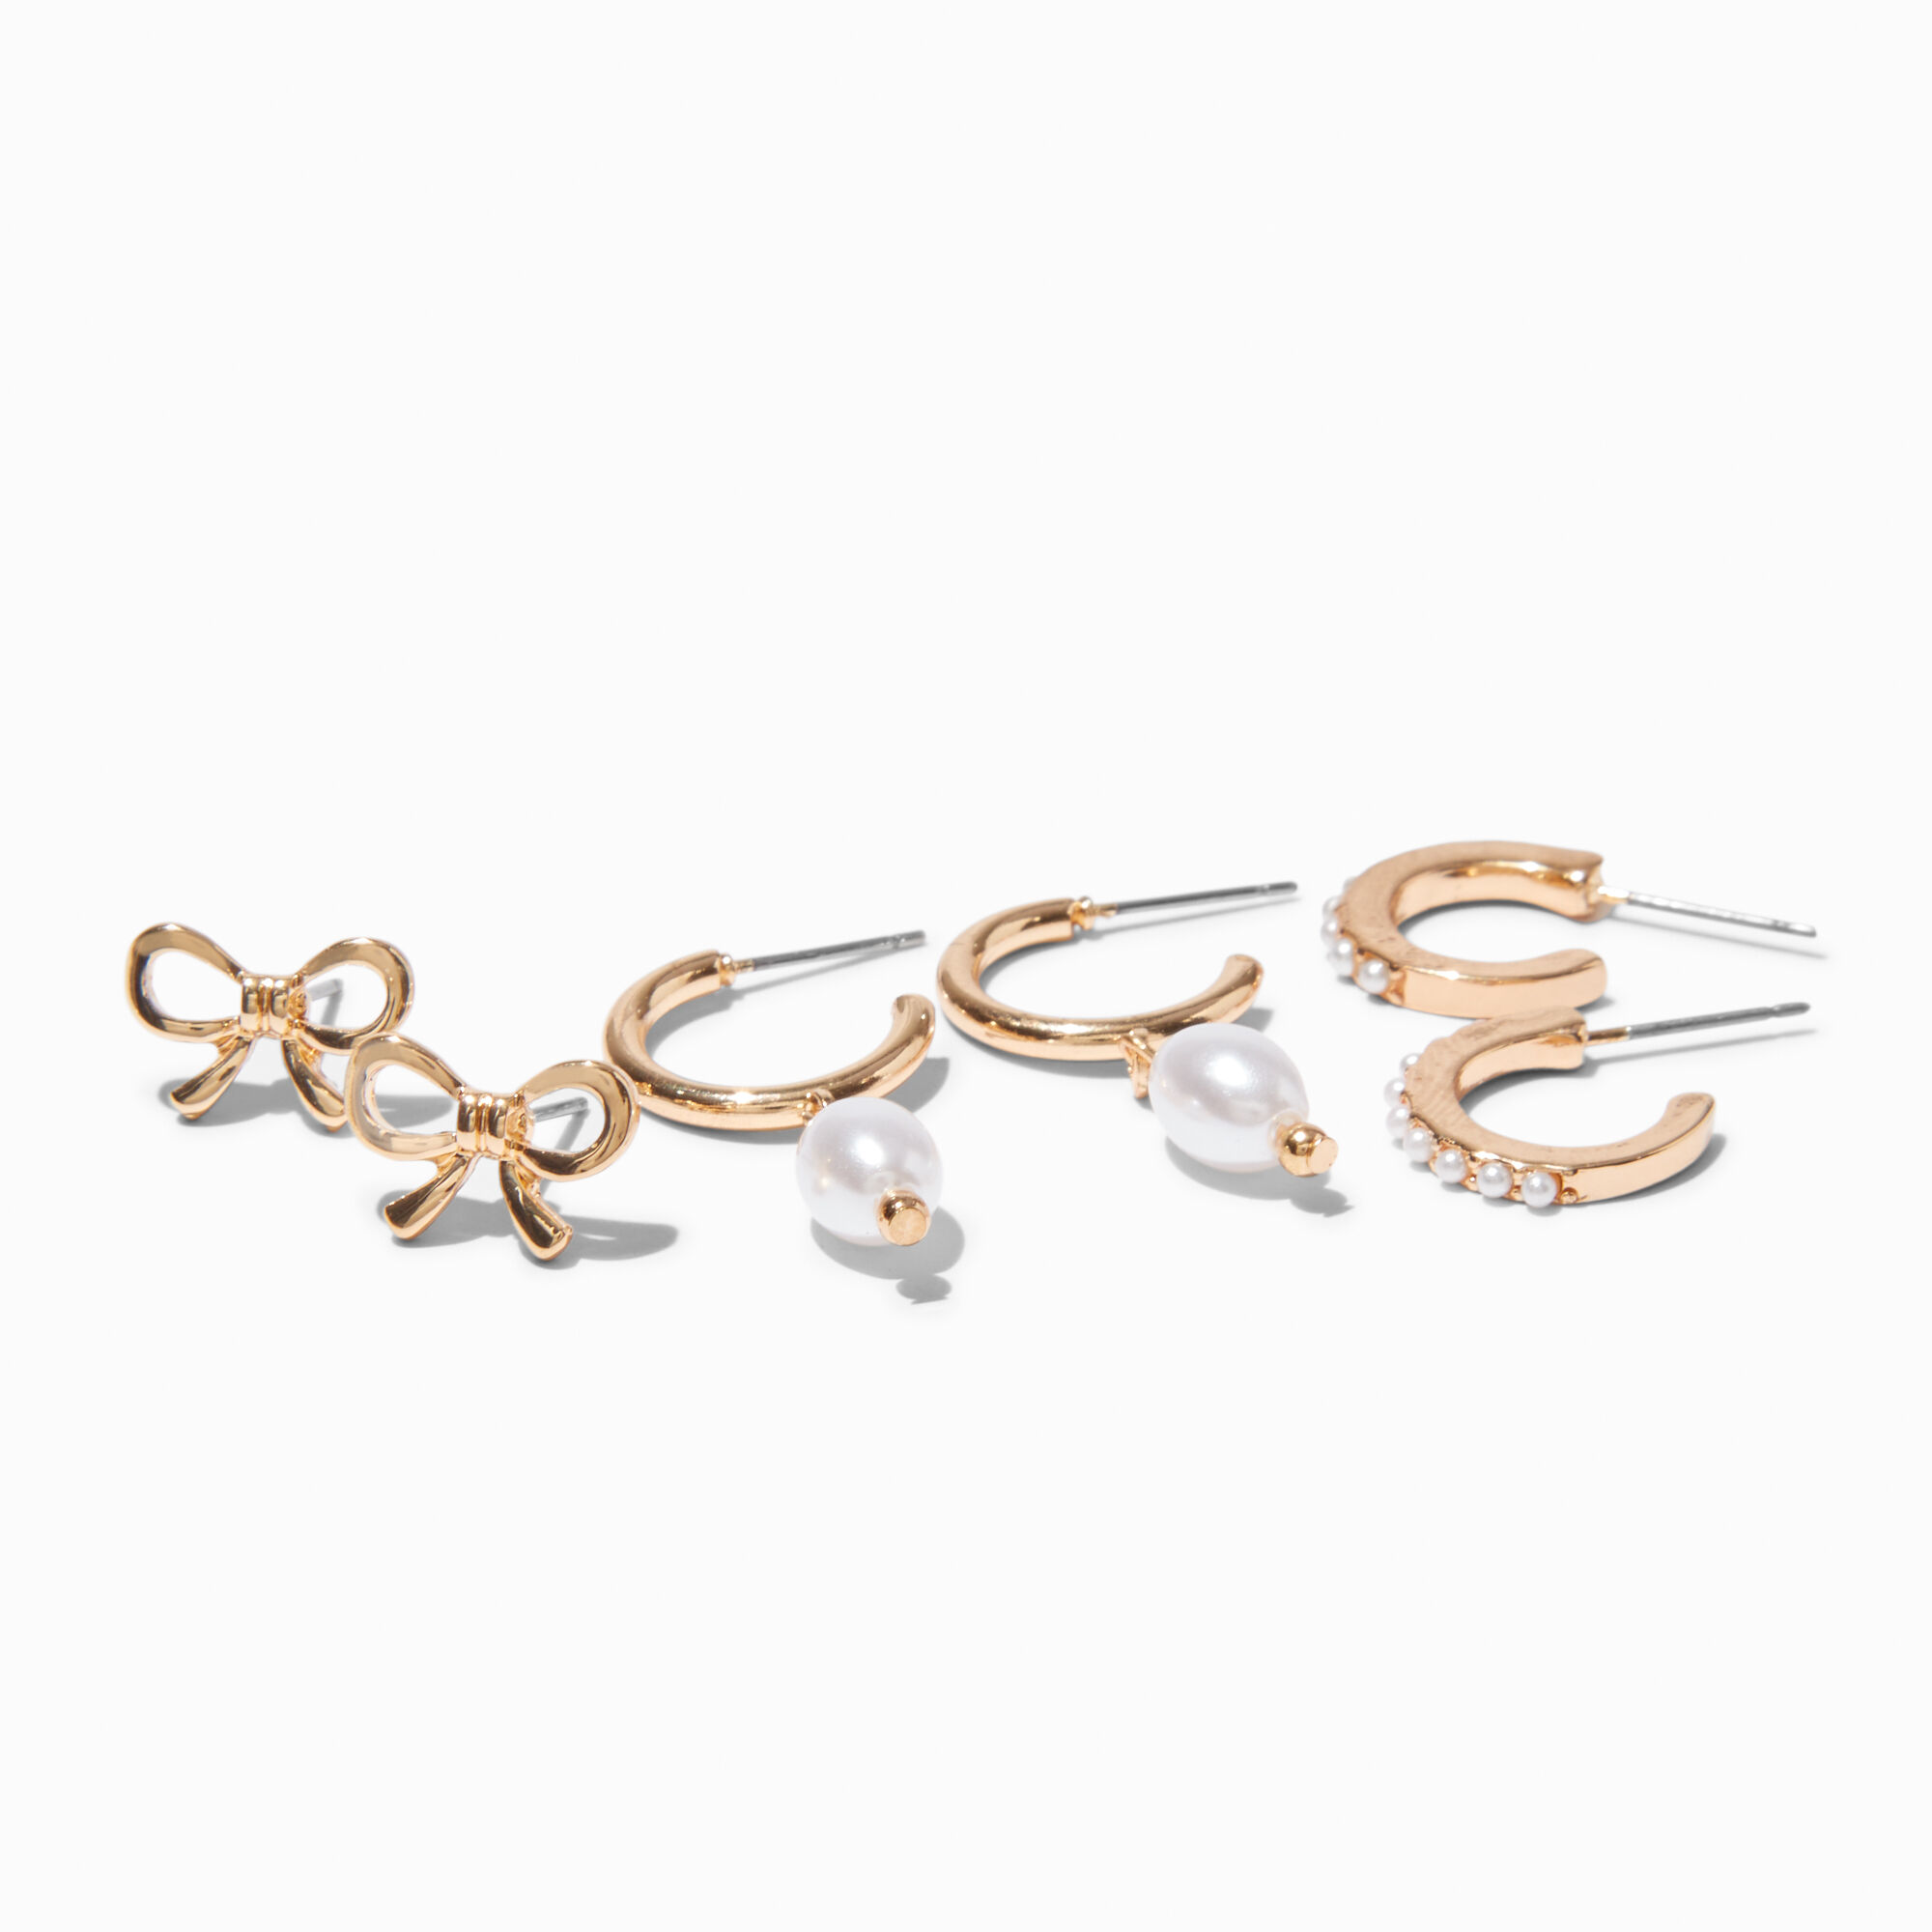 View Claires Tone Statement Hoop Stud Earrings Set 3 Pack Gold information